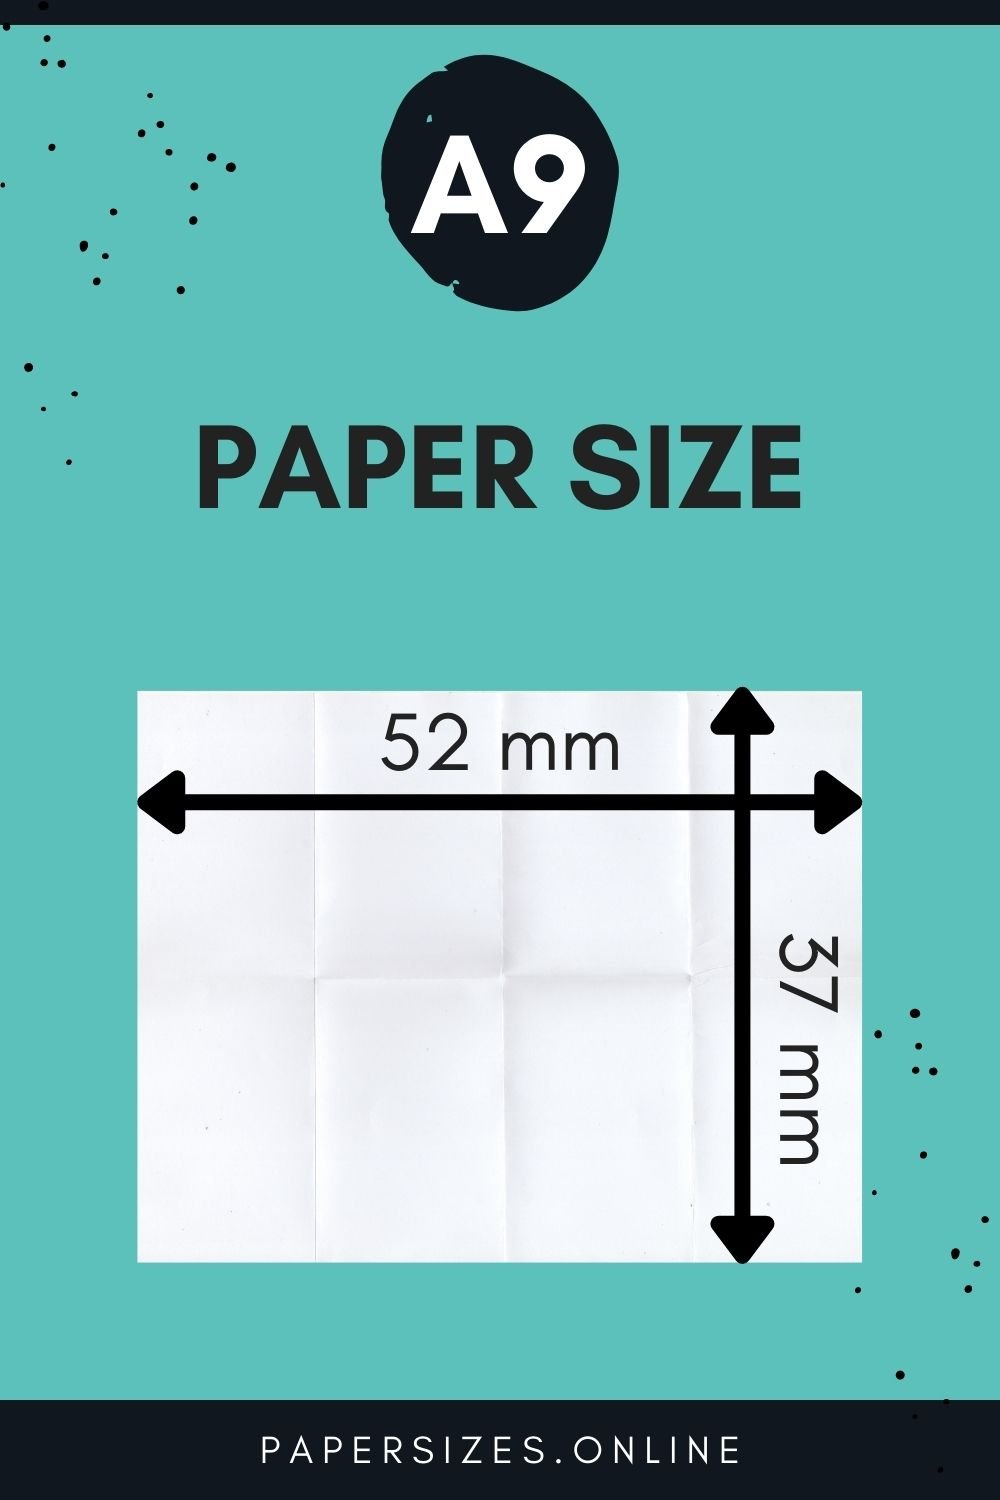 A9 paper size in mm